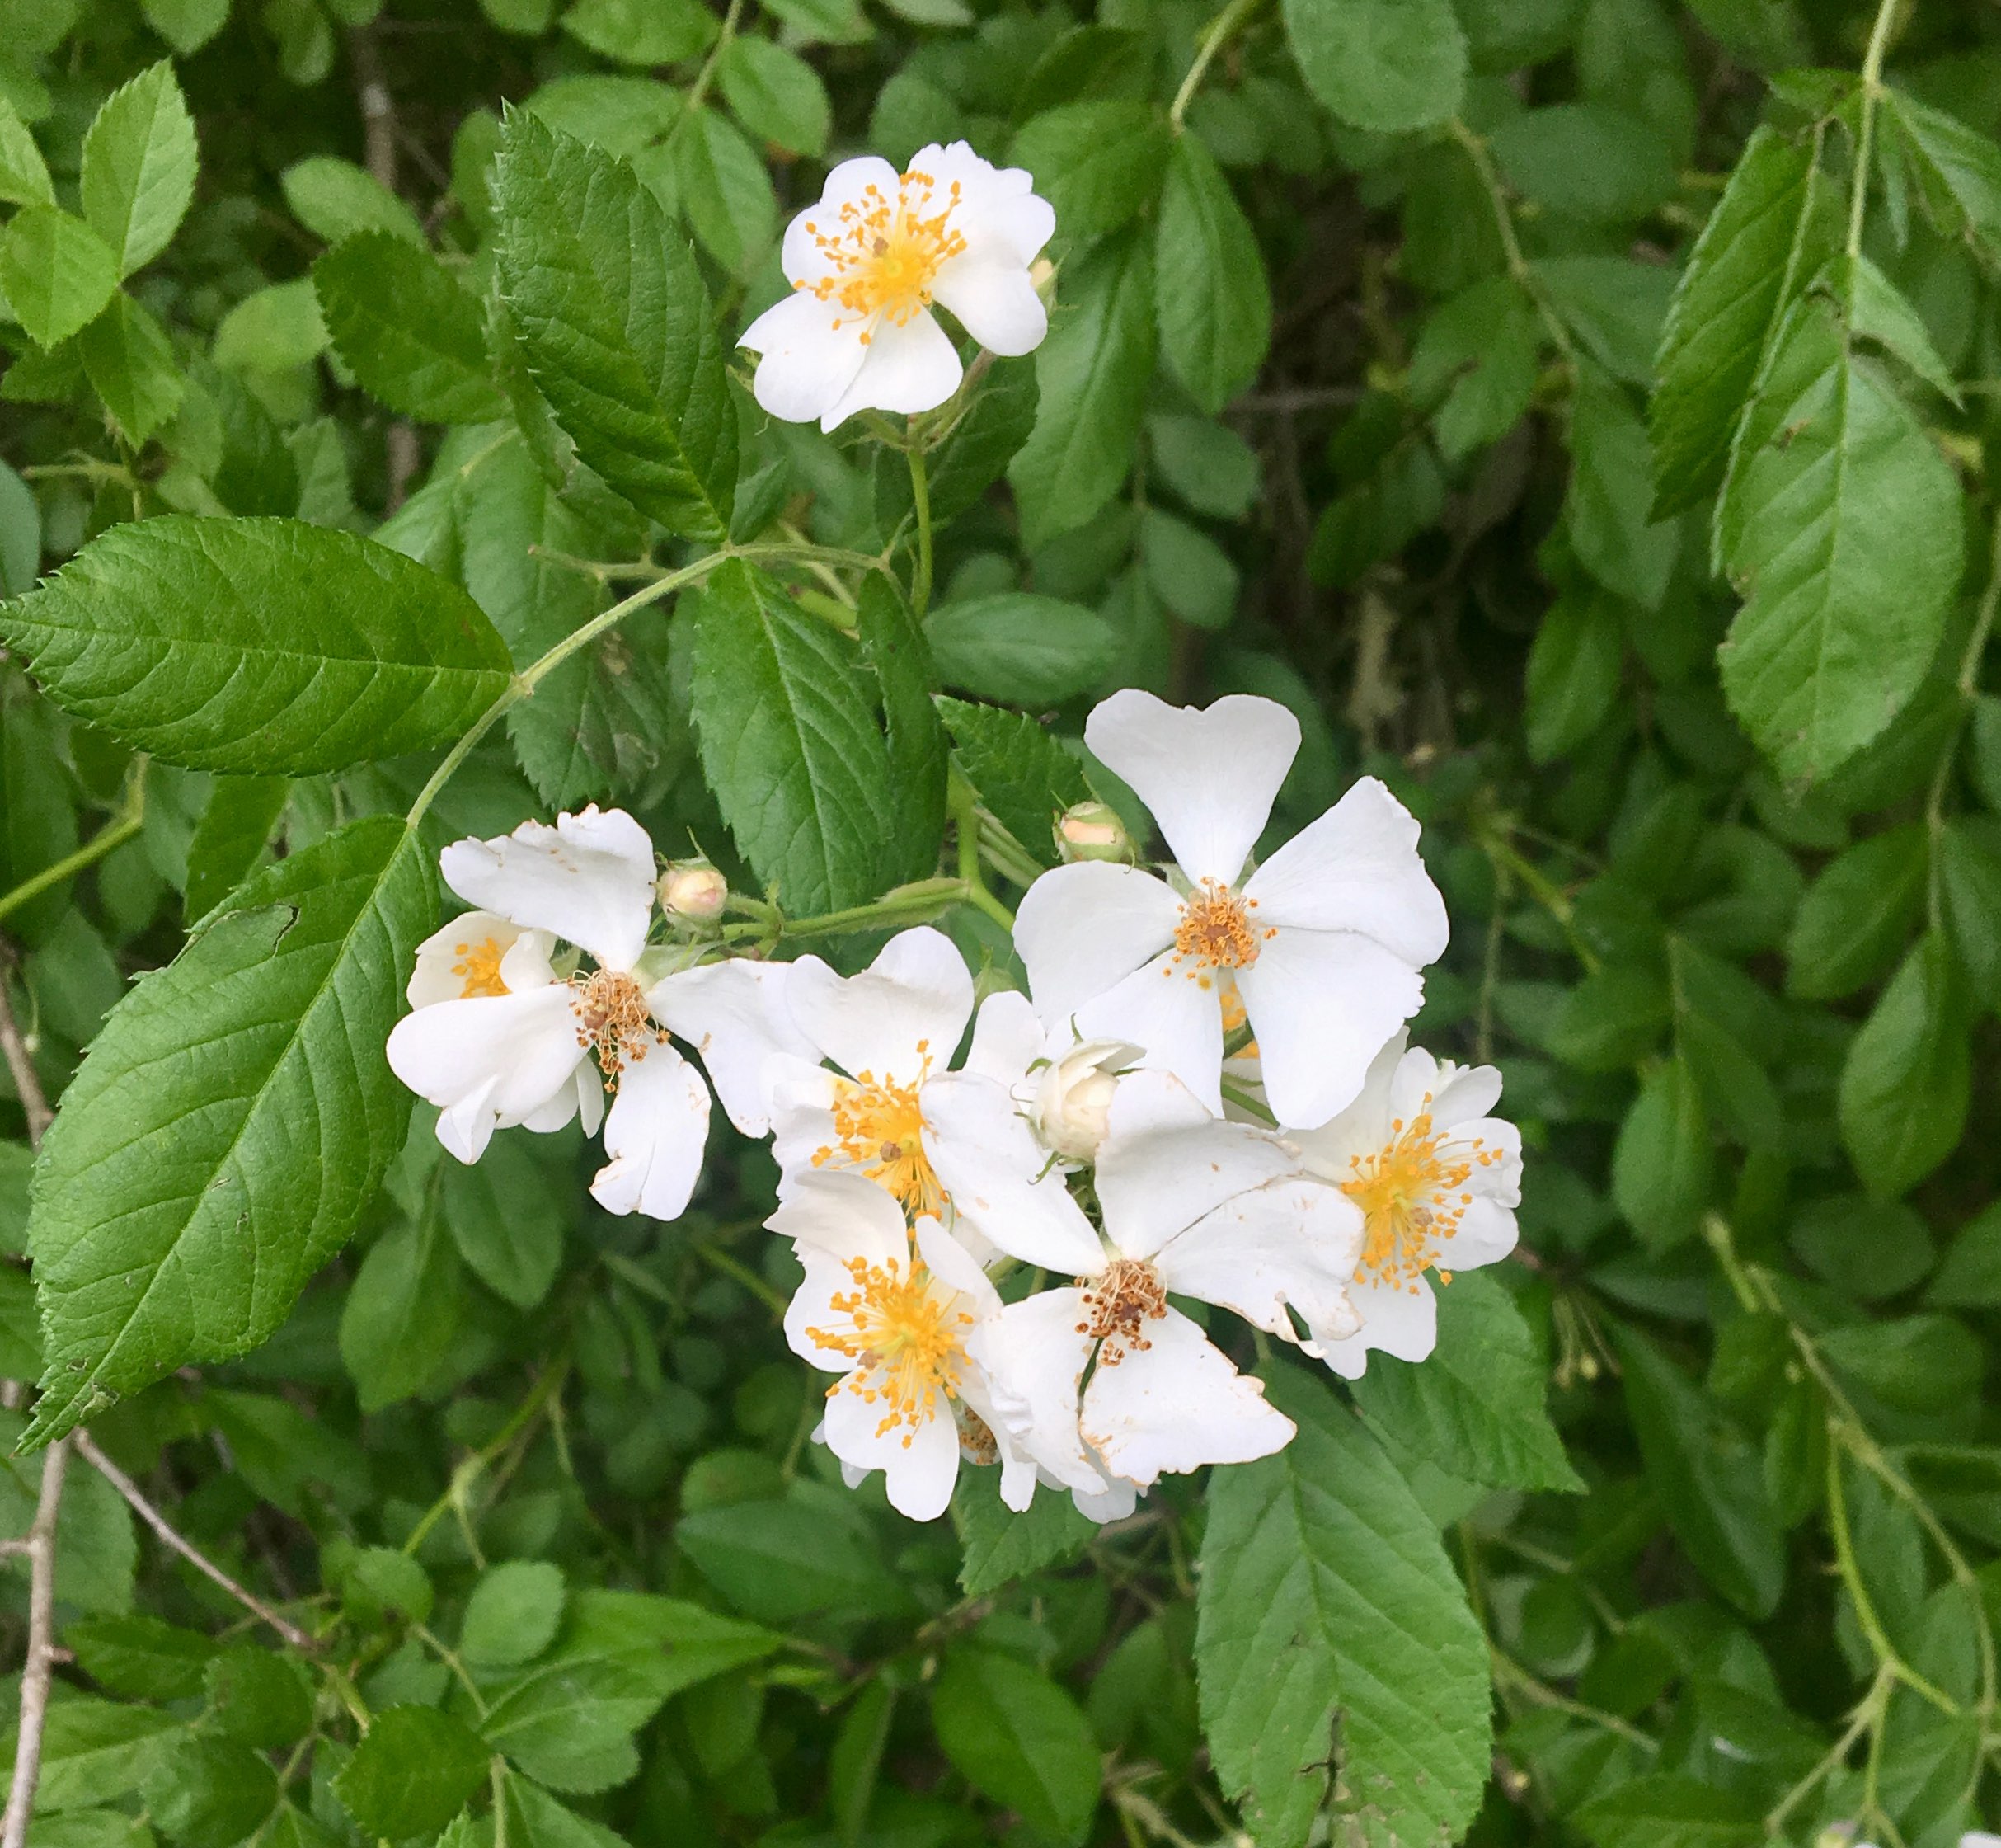 The Scientific Name is Rosa multiflora. You will likely hear them called Multiflora Rose, Hedge Rose. This picture shows the Small white to piink flowers, from 0.5